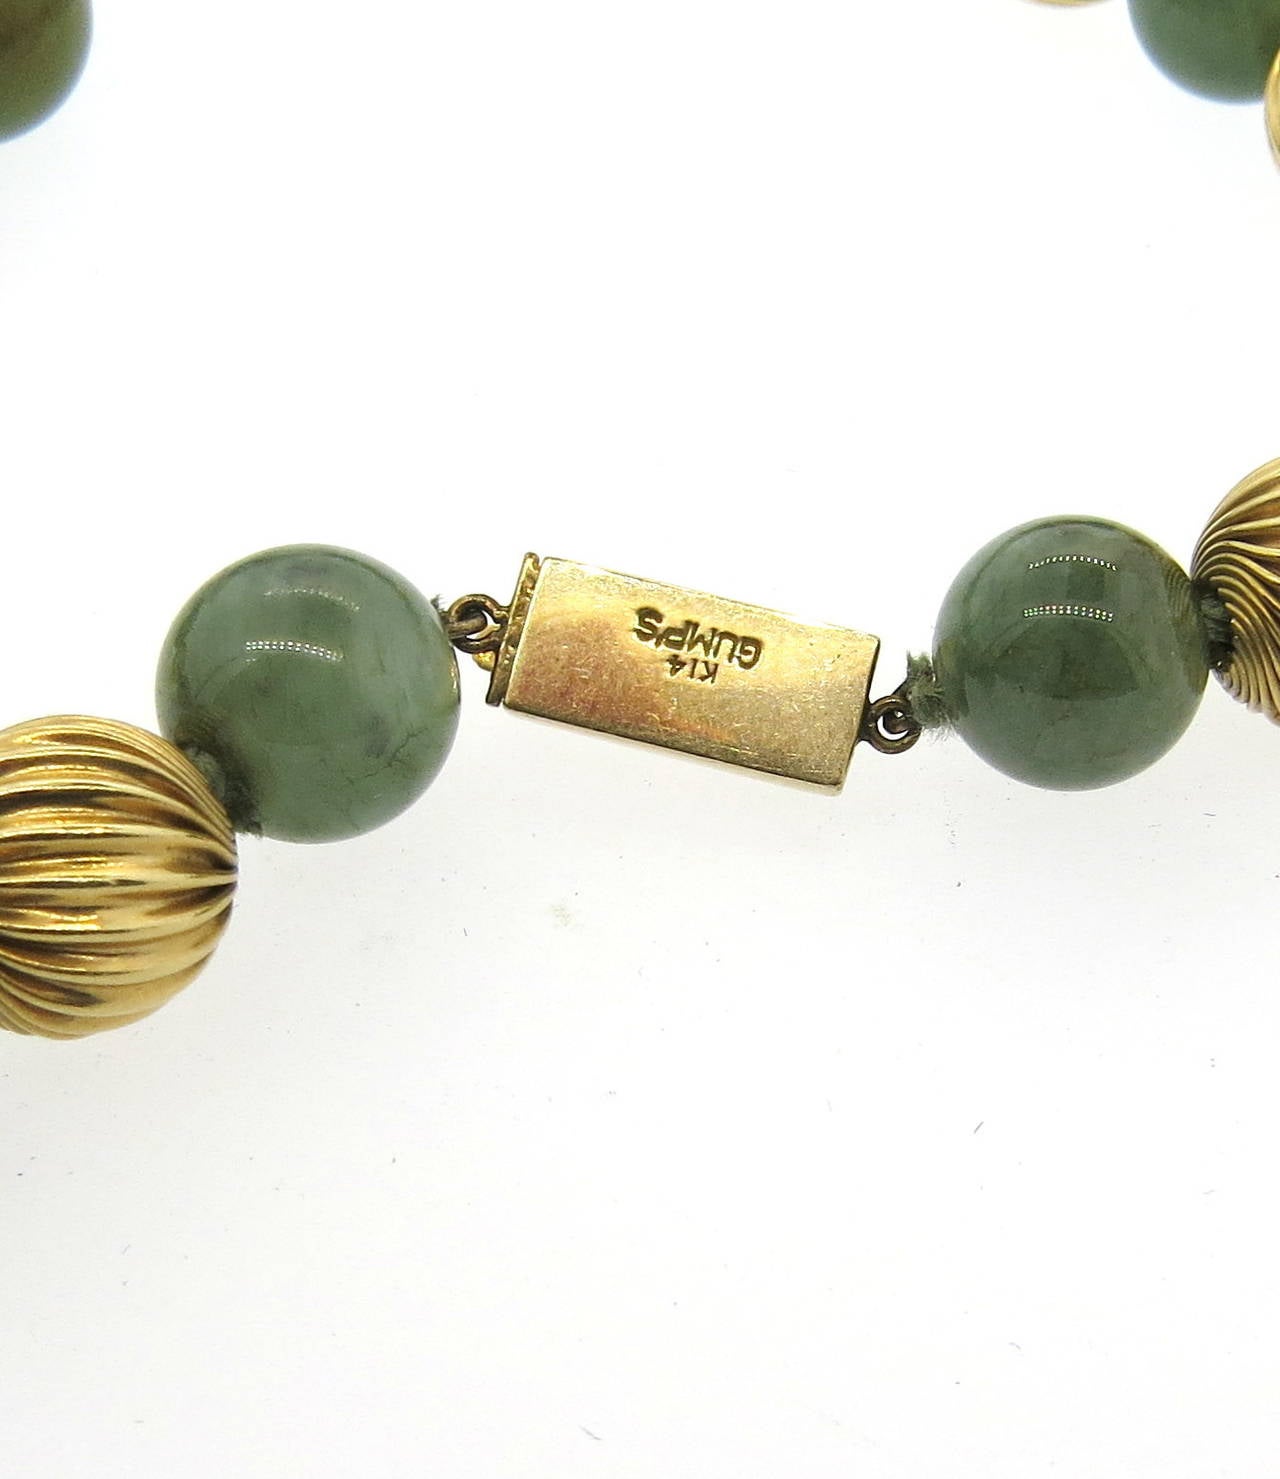 14k gold necklace by Gumps, featuring 10mm to 11.4mm jade beads. Necklace is 27 1/4